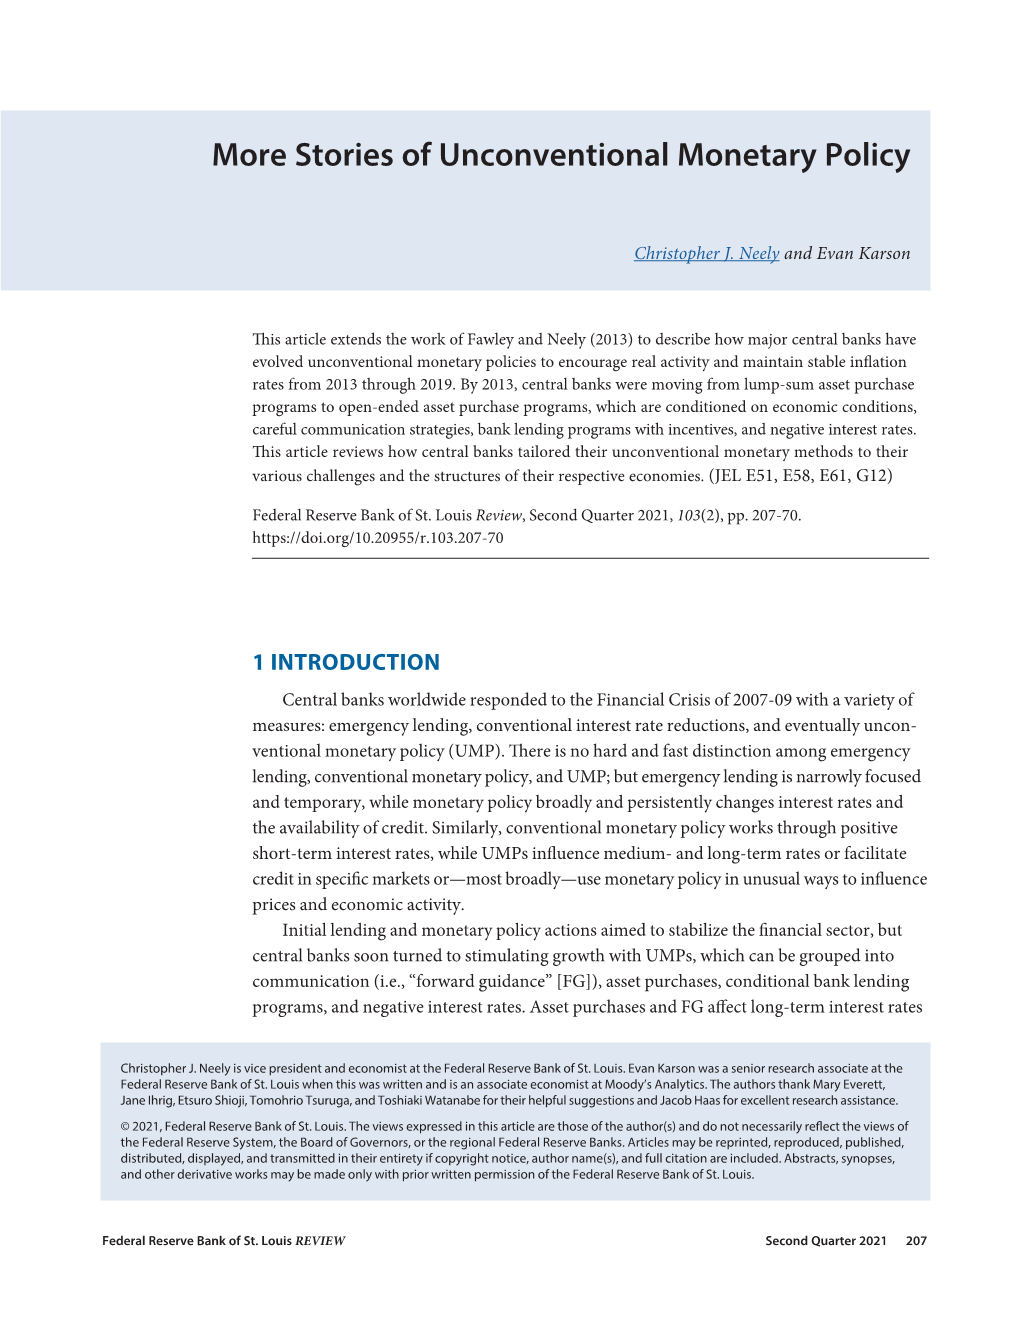 More Stories of Unconventional Monetary Policy